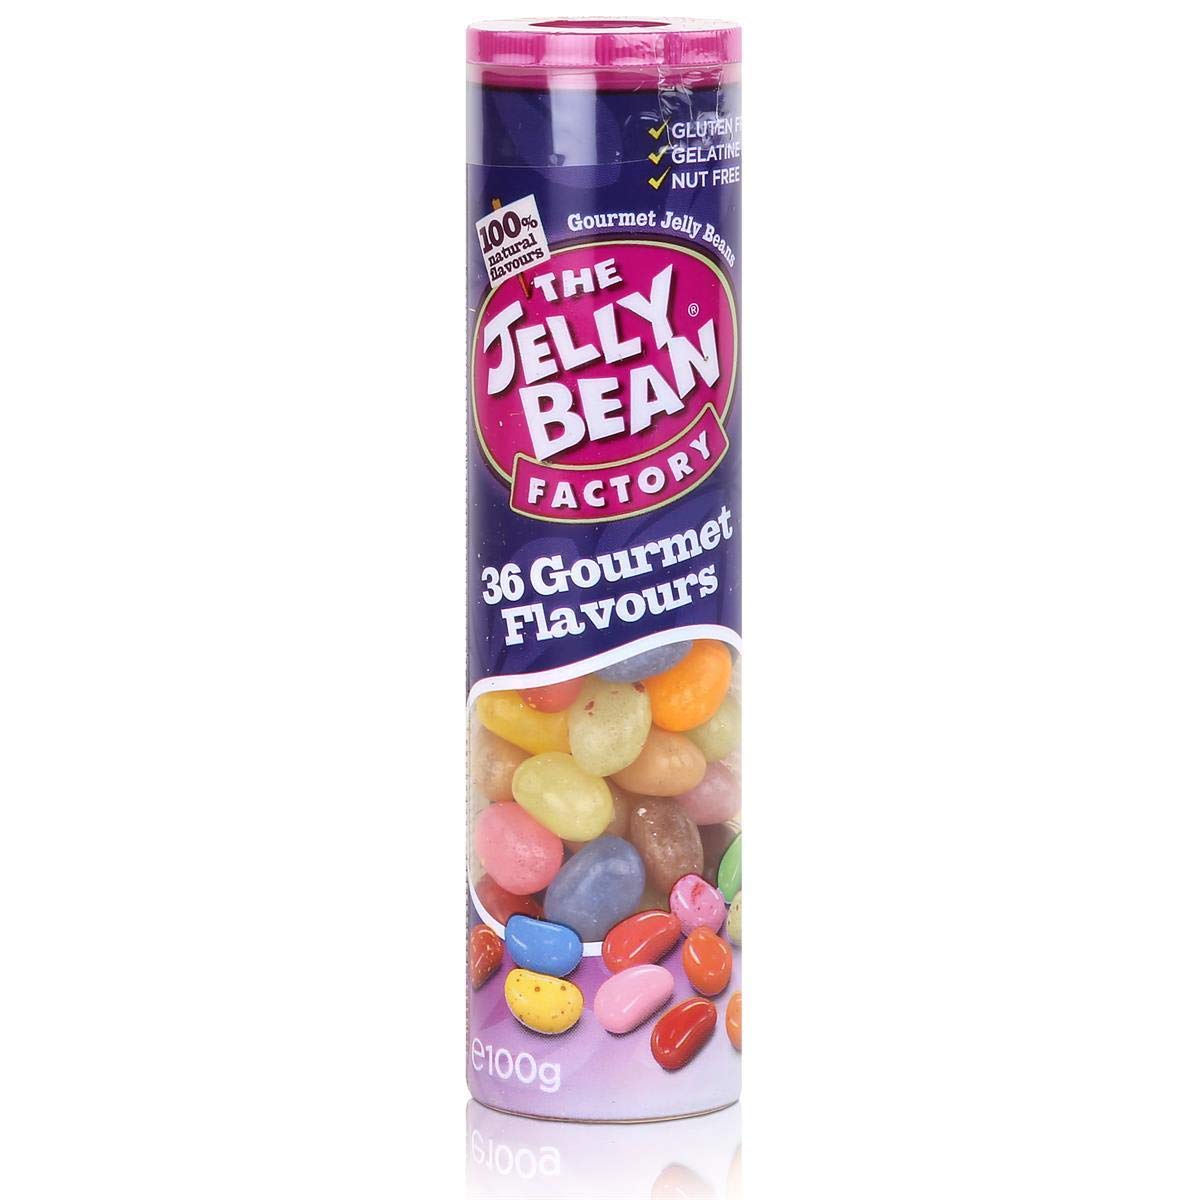 The Jelly Bean Factory 36 Gourmet Flavour Jelly Beans Image